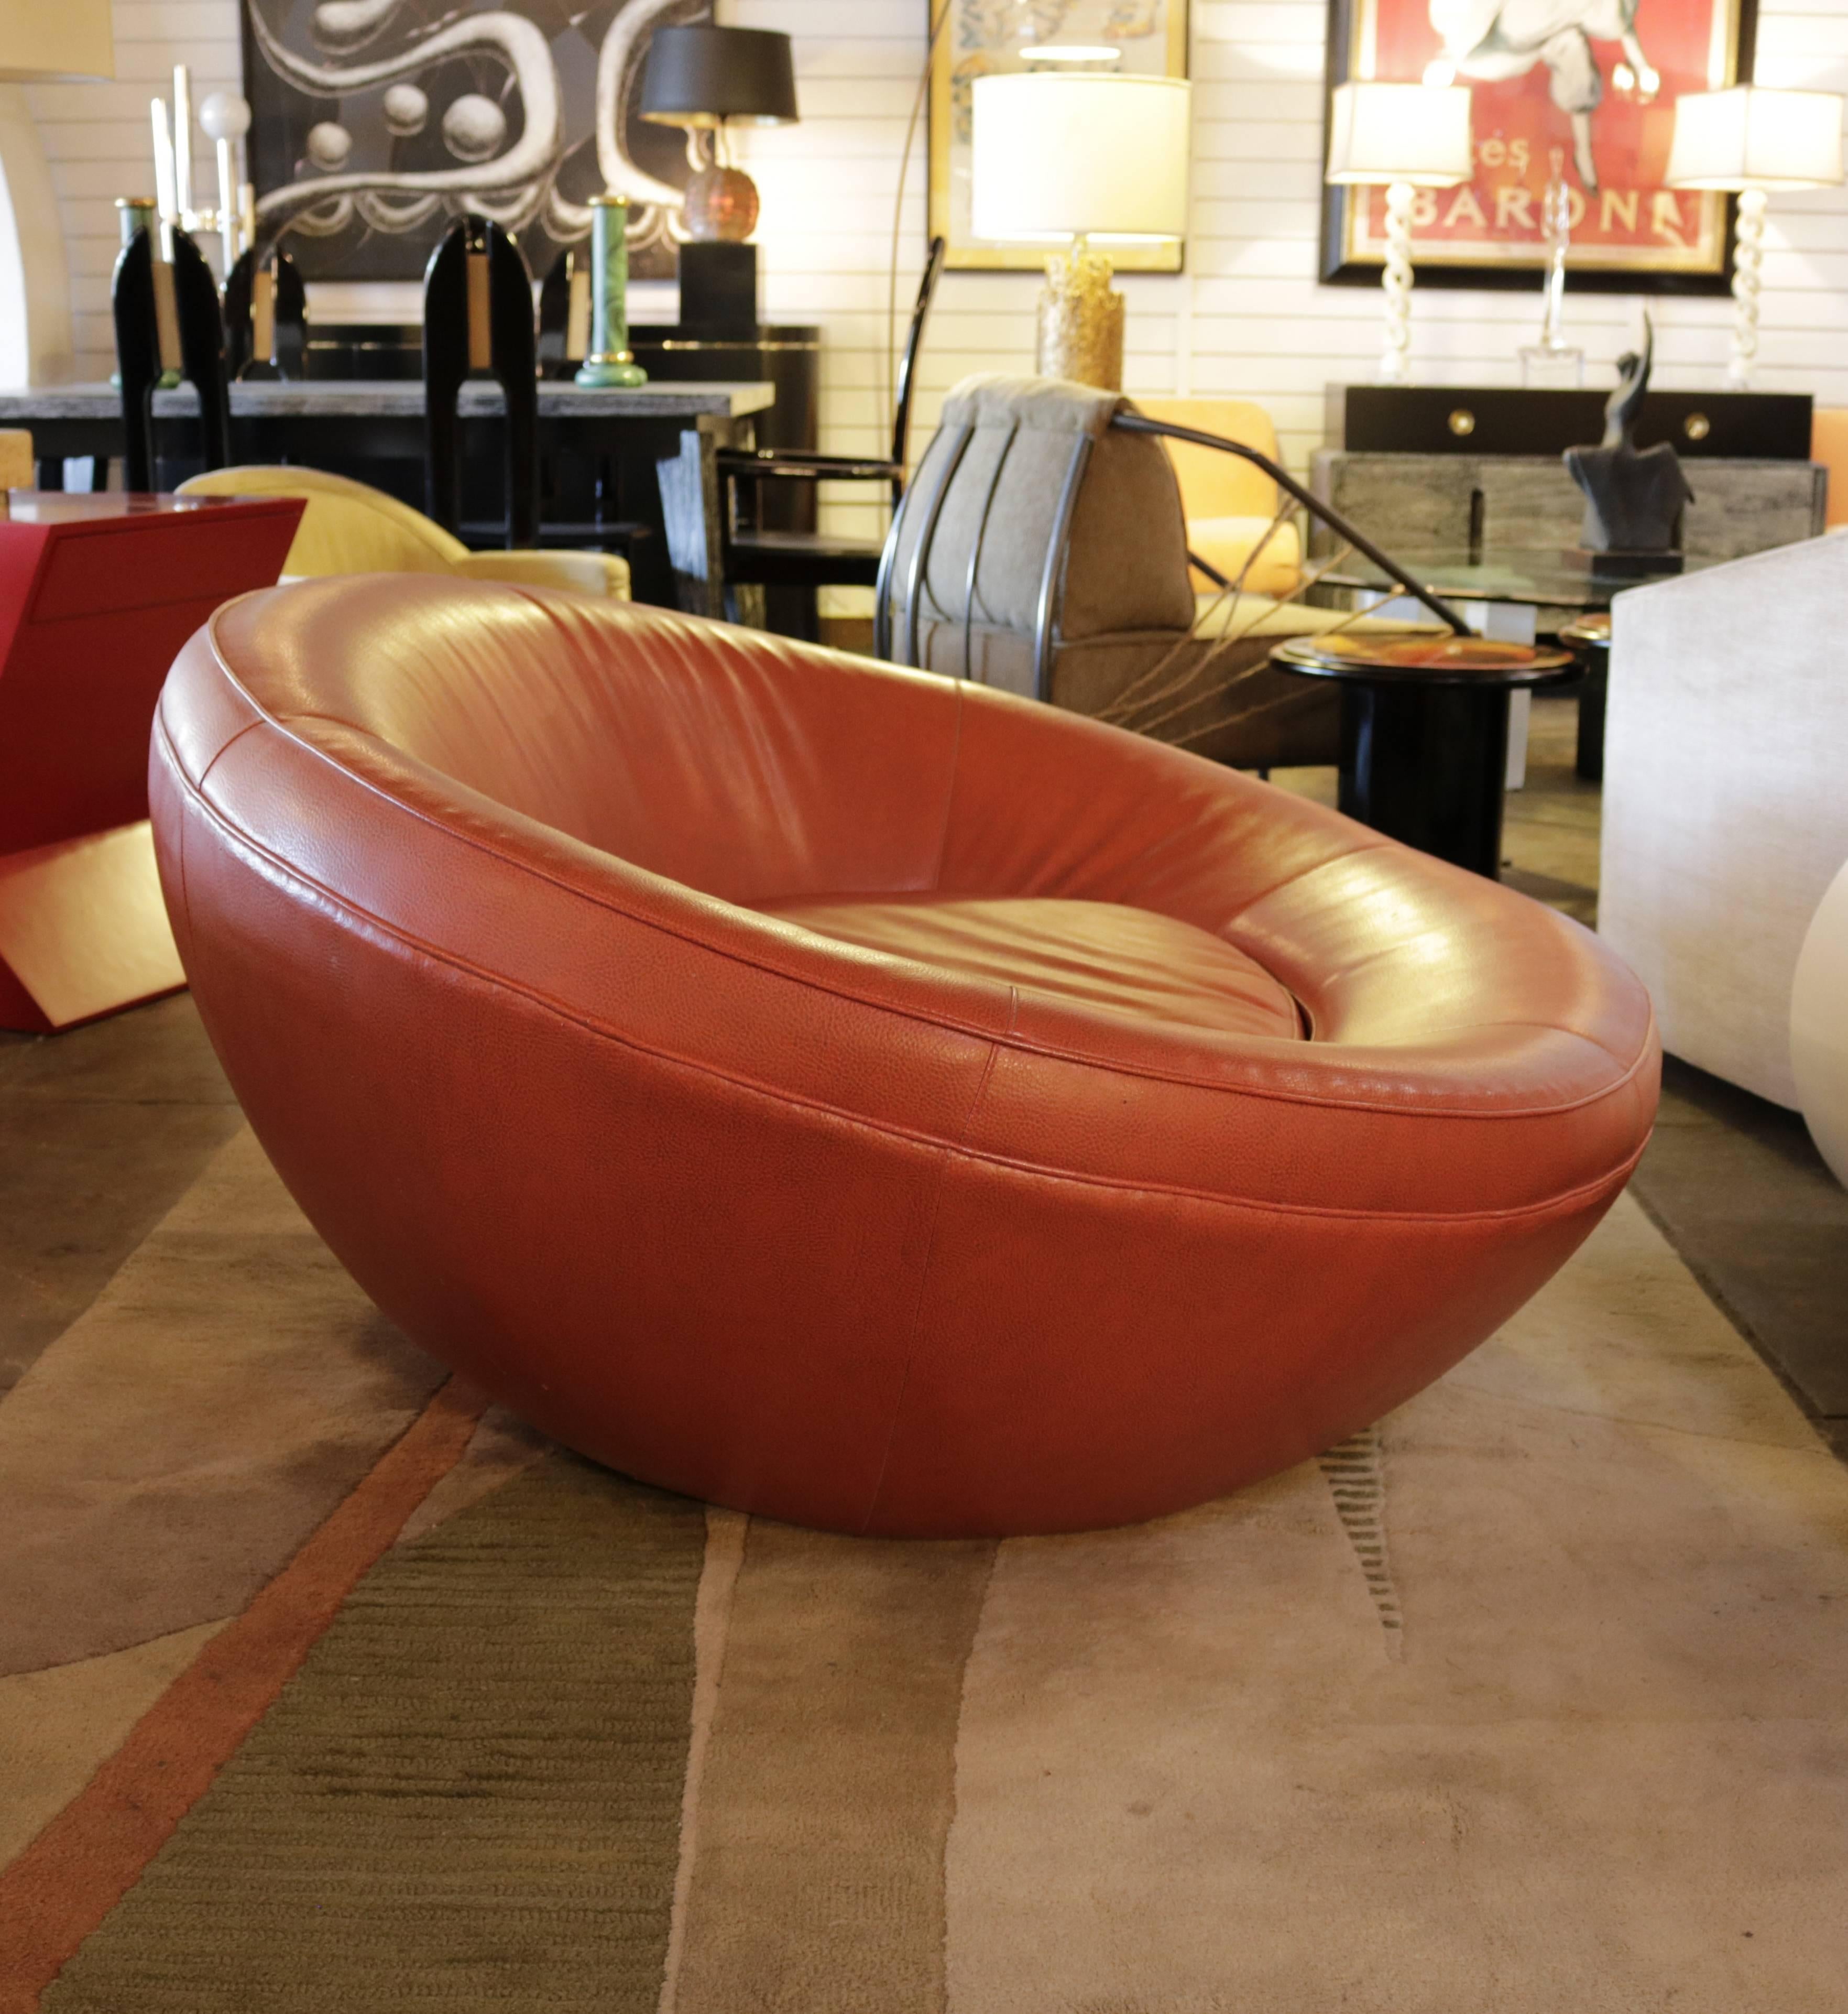 This is a nest for people in love!
It retains its original rust orange high-quality Naugahyde which is in excellent condition!
Measure: 36" is the seat depth and 48" the total depth.